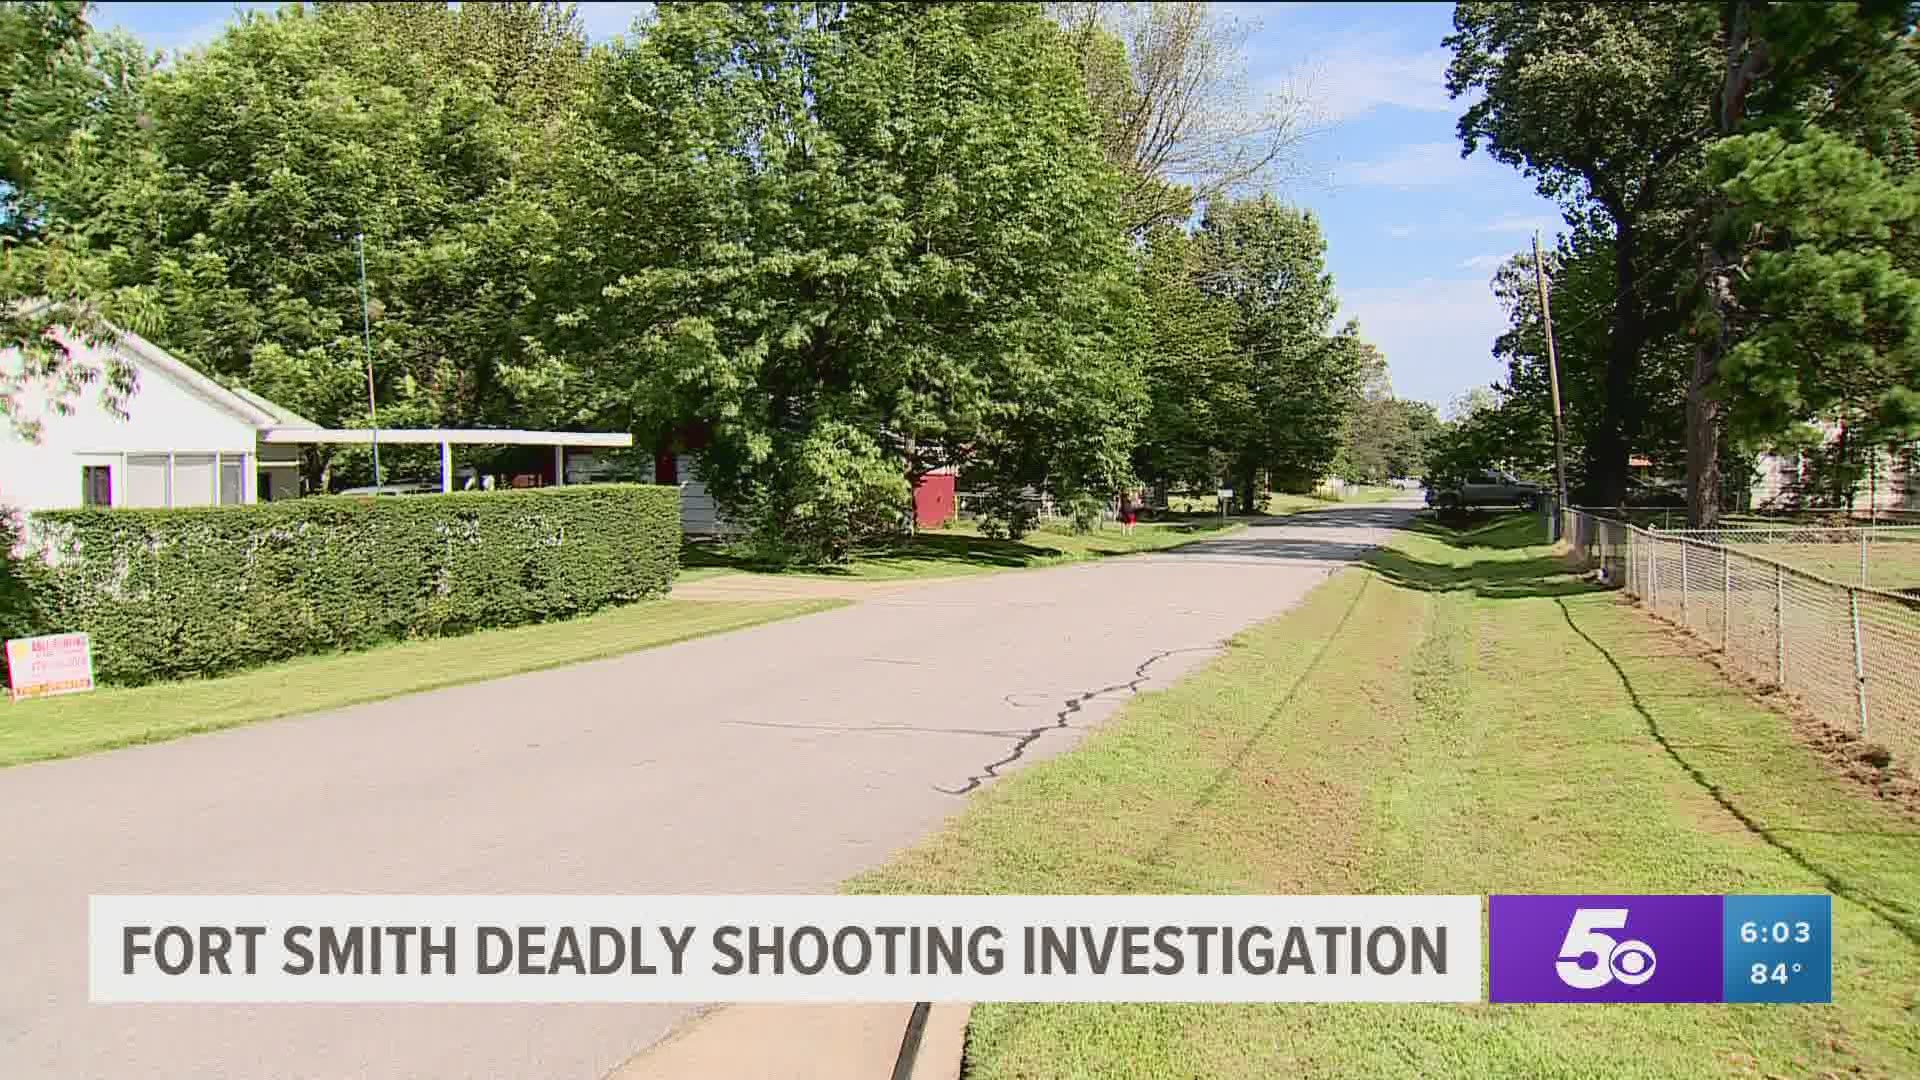 Fort Smith deadly shooting investigation